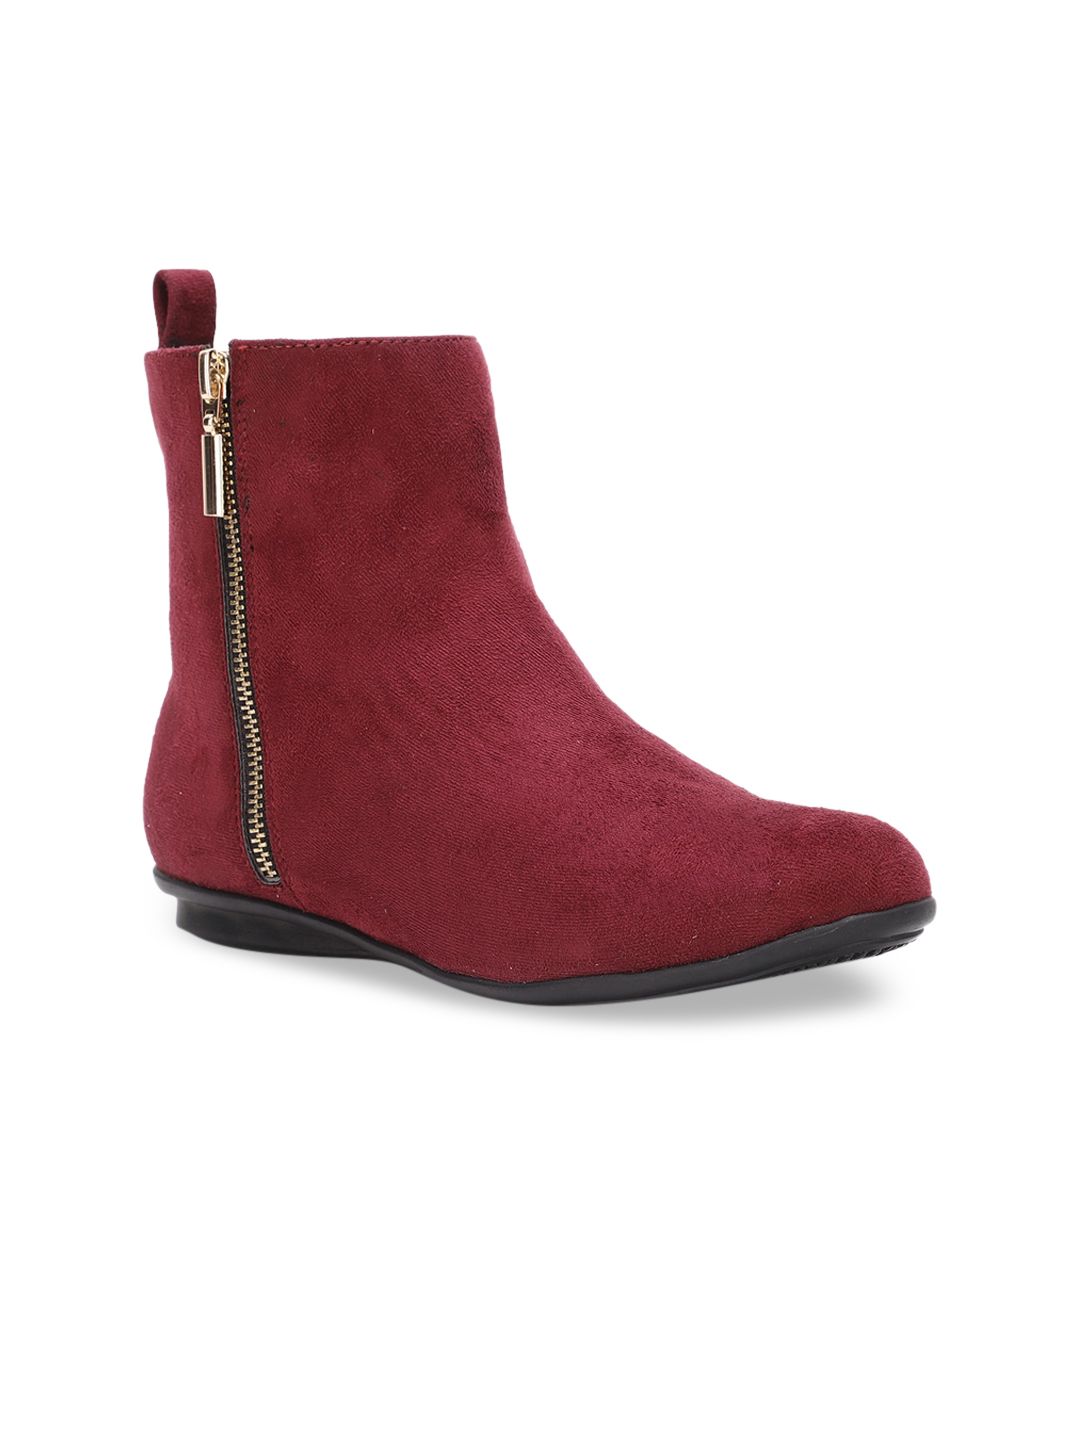 Bruno Manetti Women Red Solid Suede High-Top Flat Boots Price in India